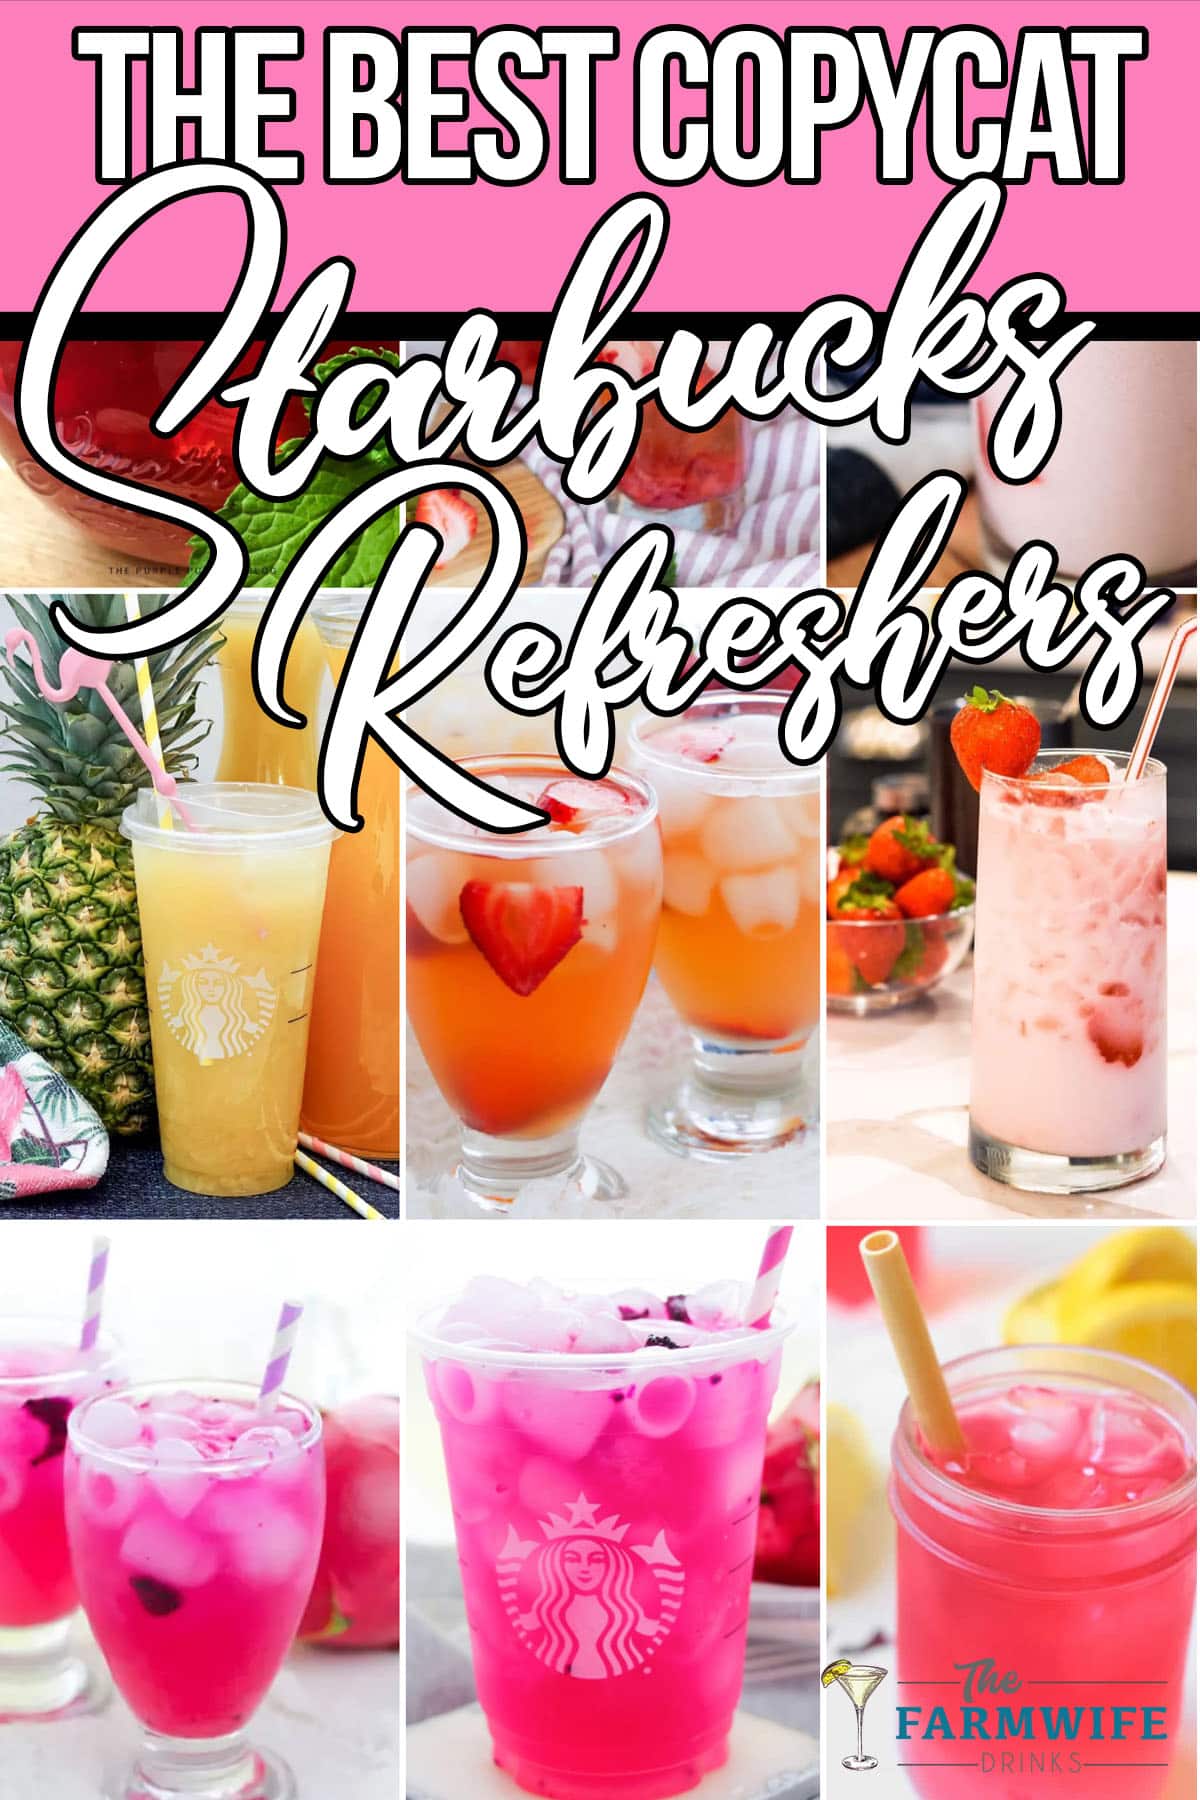 collage of photos showing starbucks copycat refresher drinks with text which reads the best copycat starbucks refreshers